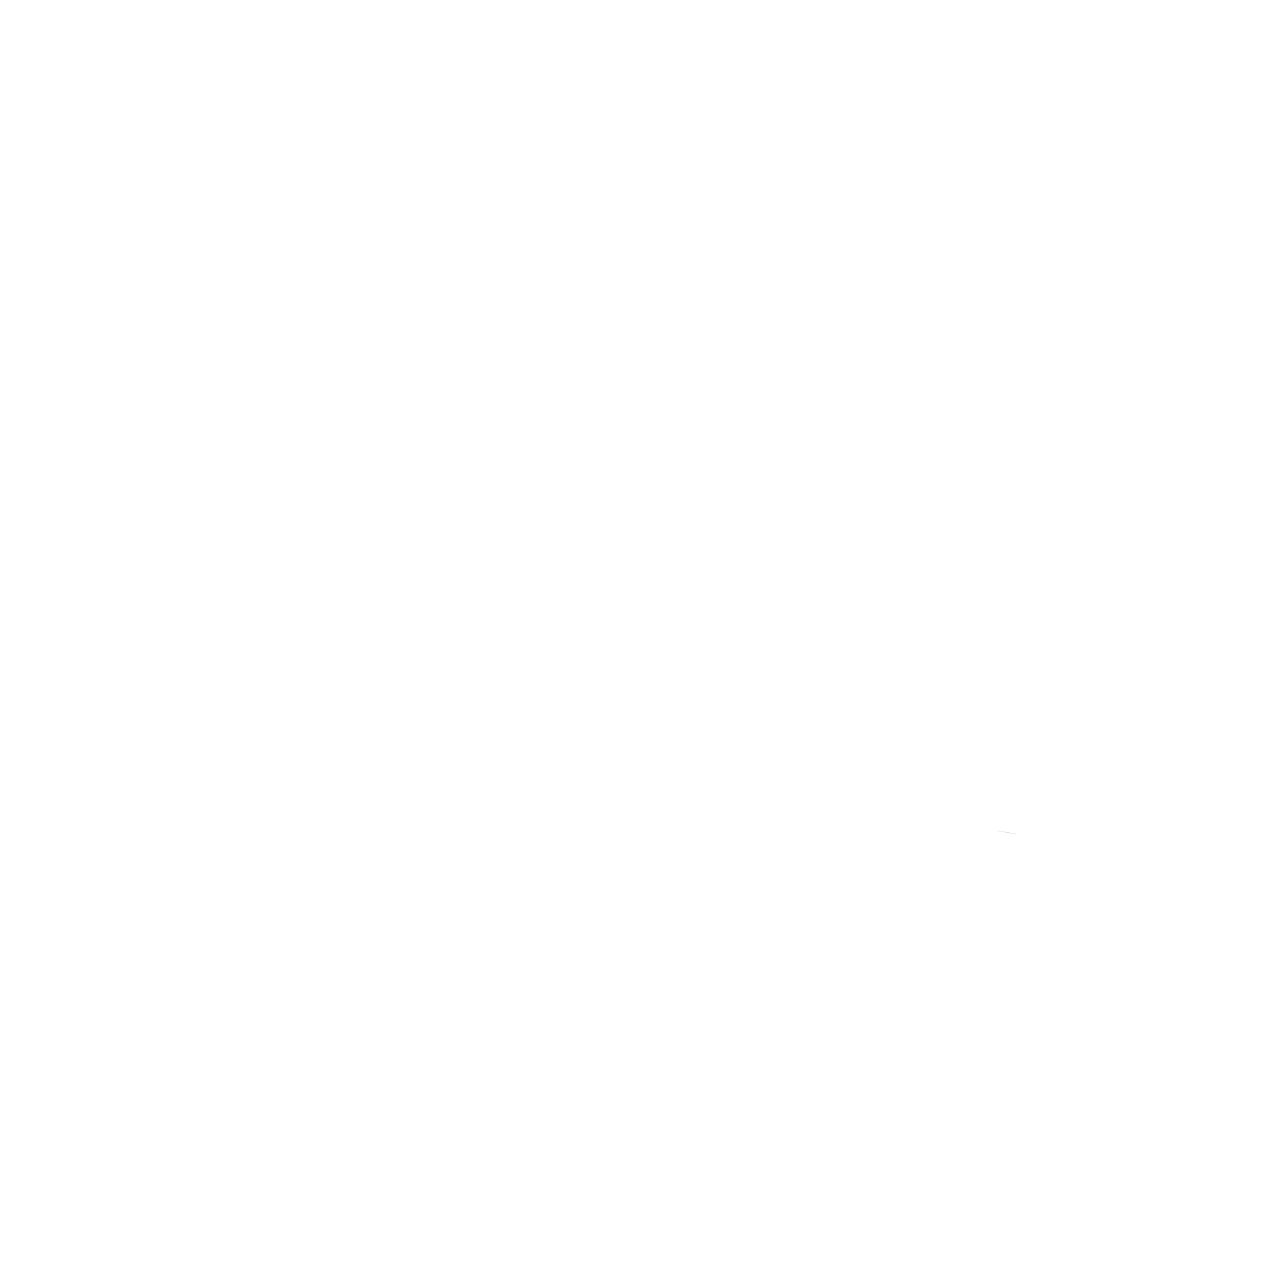 Sunshine and dry weather icon